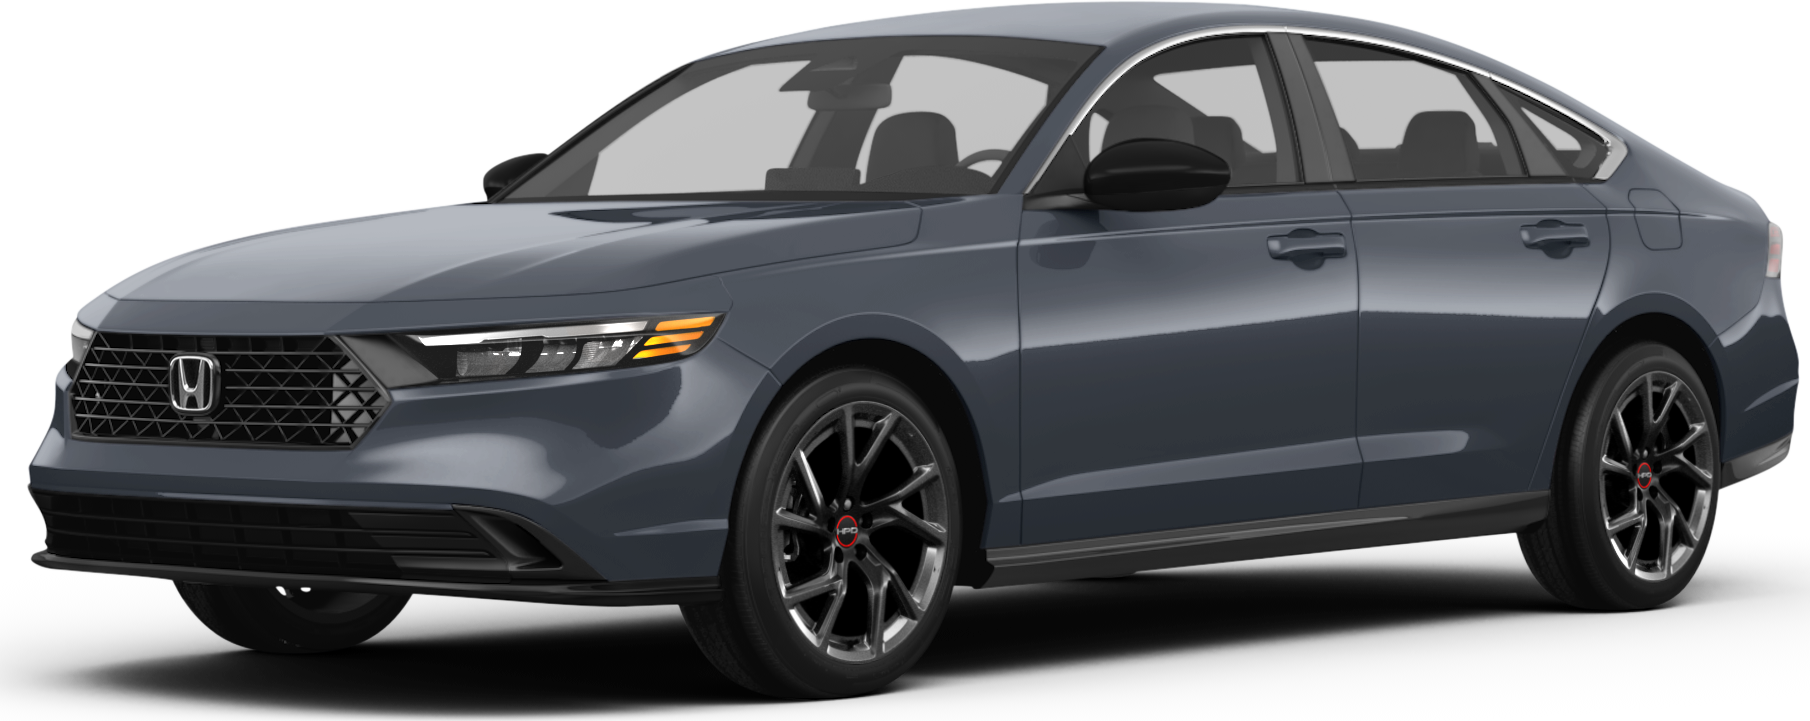 https://file.kelleybluebookimages.com/kbb/base/evox/CP/52722/2024-Honda-Accord-front_52722_032_1810x721_GC_cropped.png